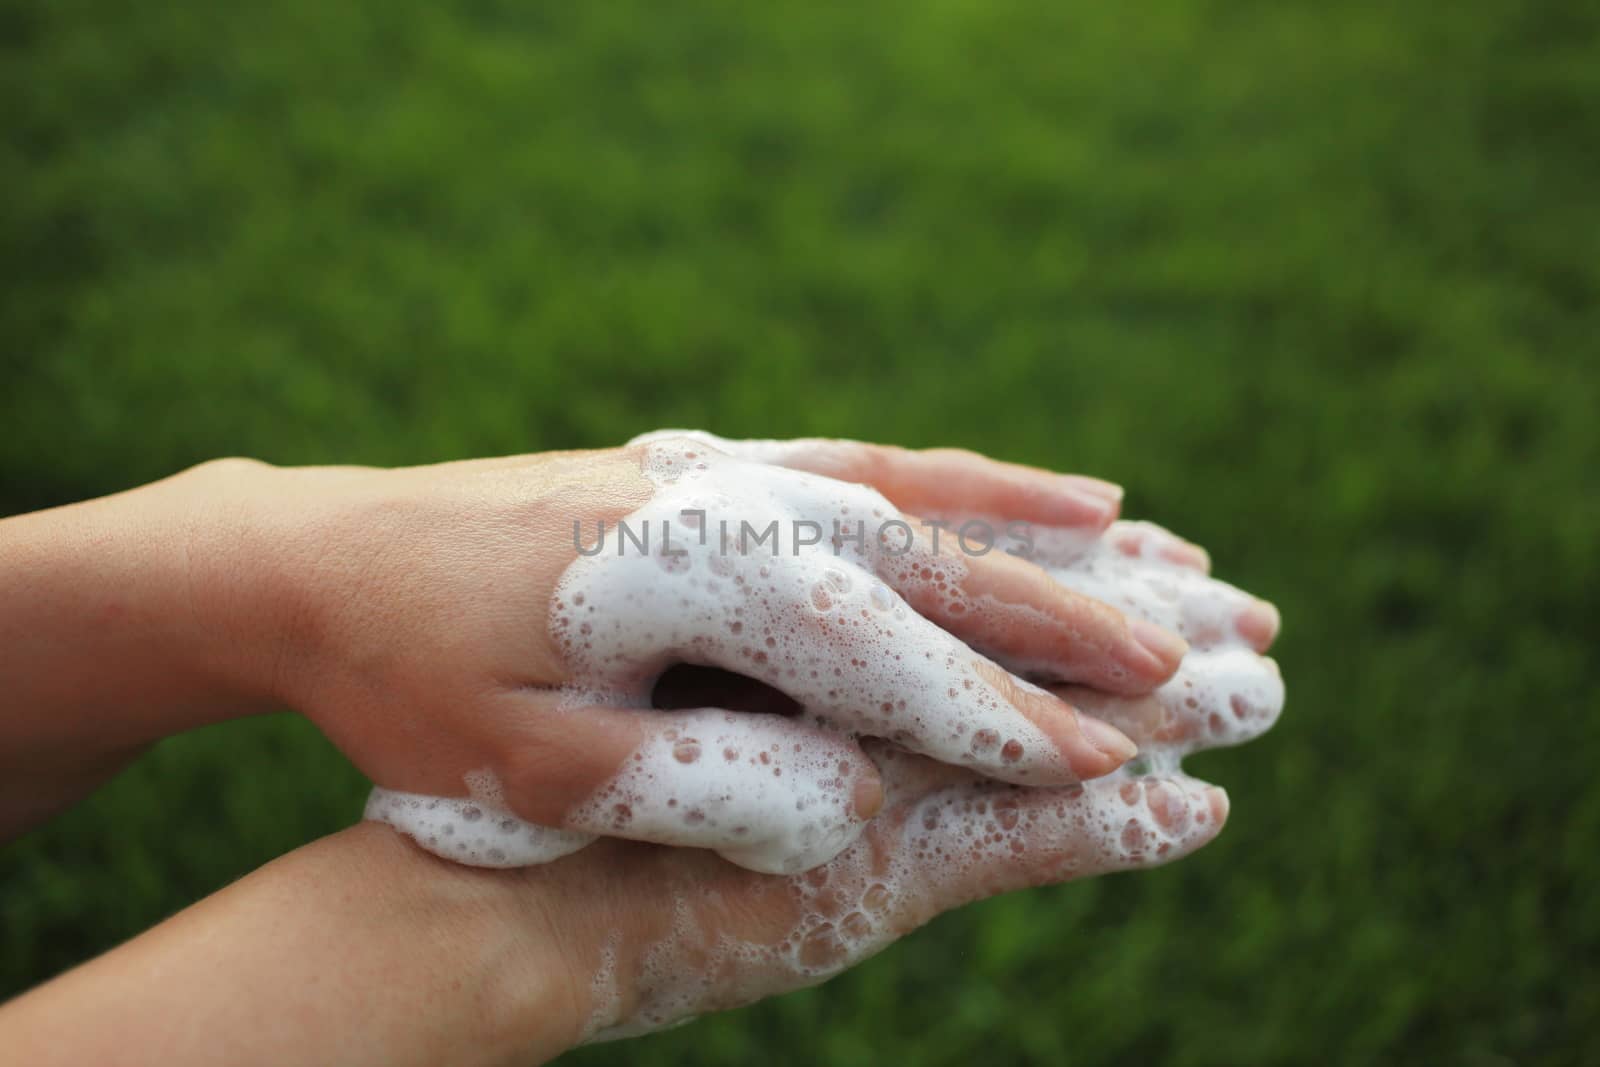 Washing hands rubbing with soap man for corona virus prevention, hygiene to stop spreading coronavirus. Death to germs. You need to make sure that microbes have a zero chance. High quality photo